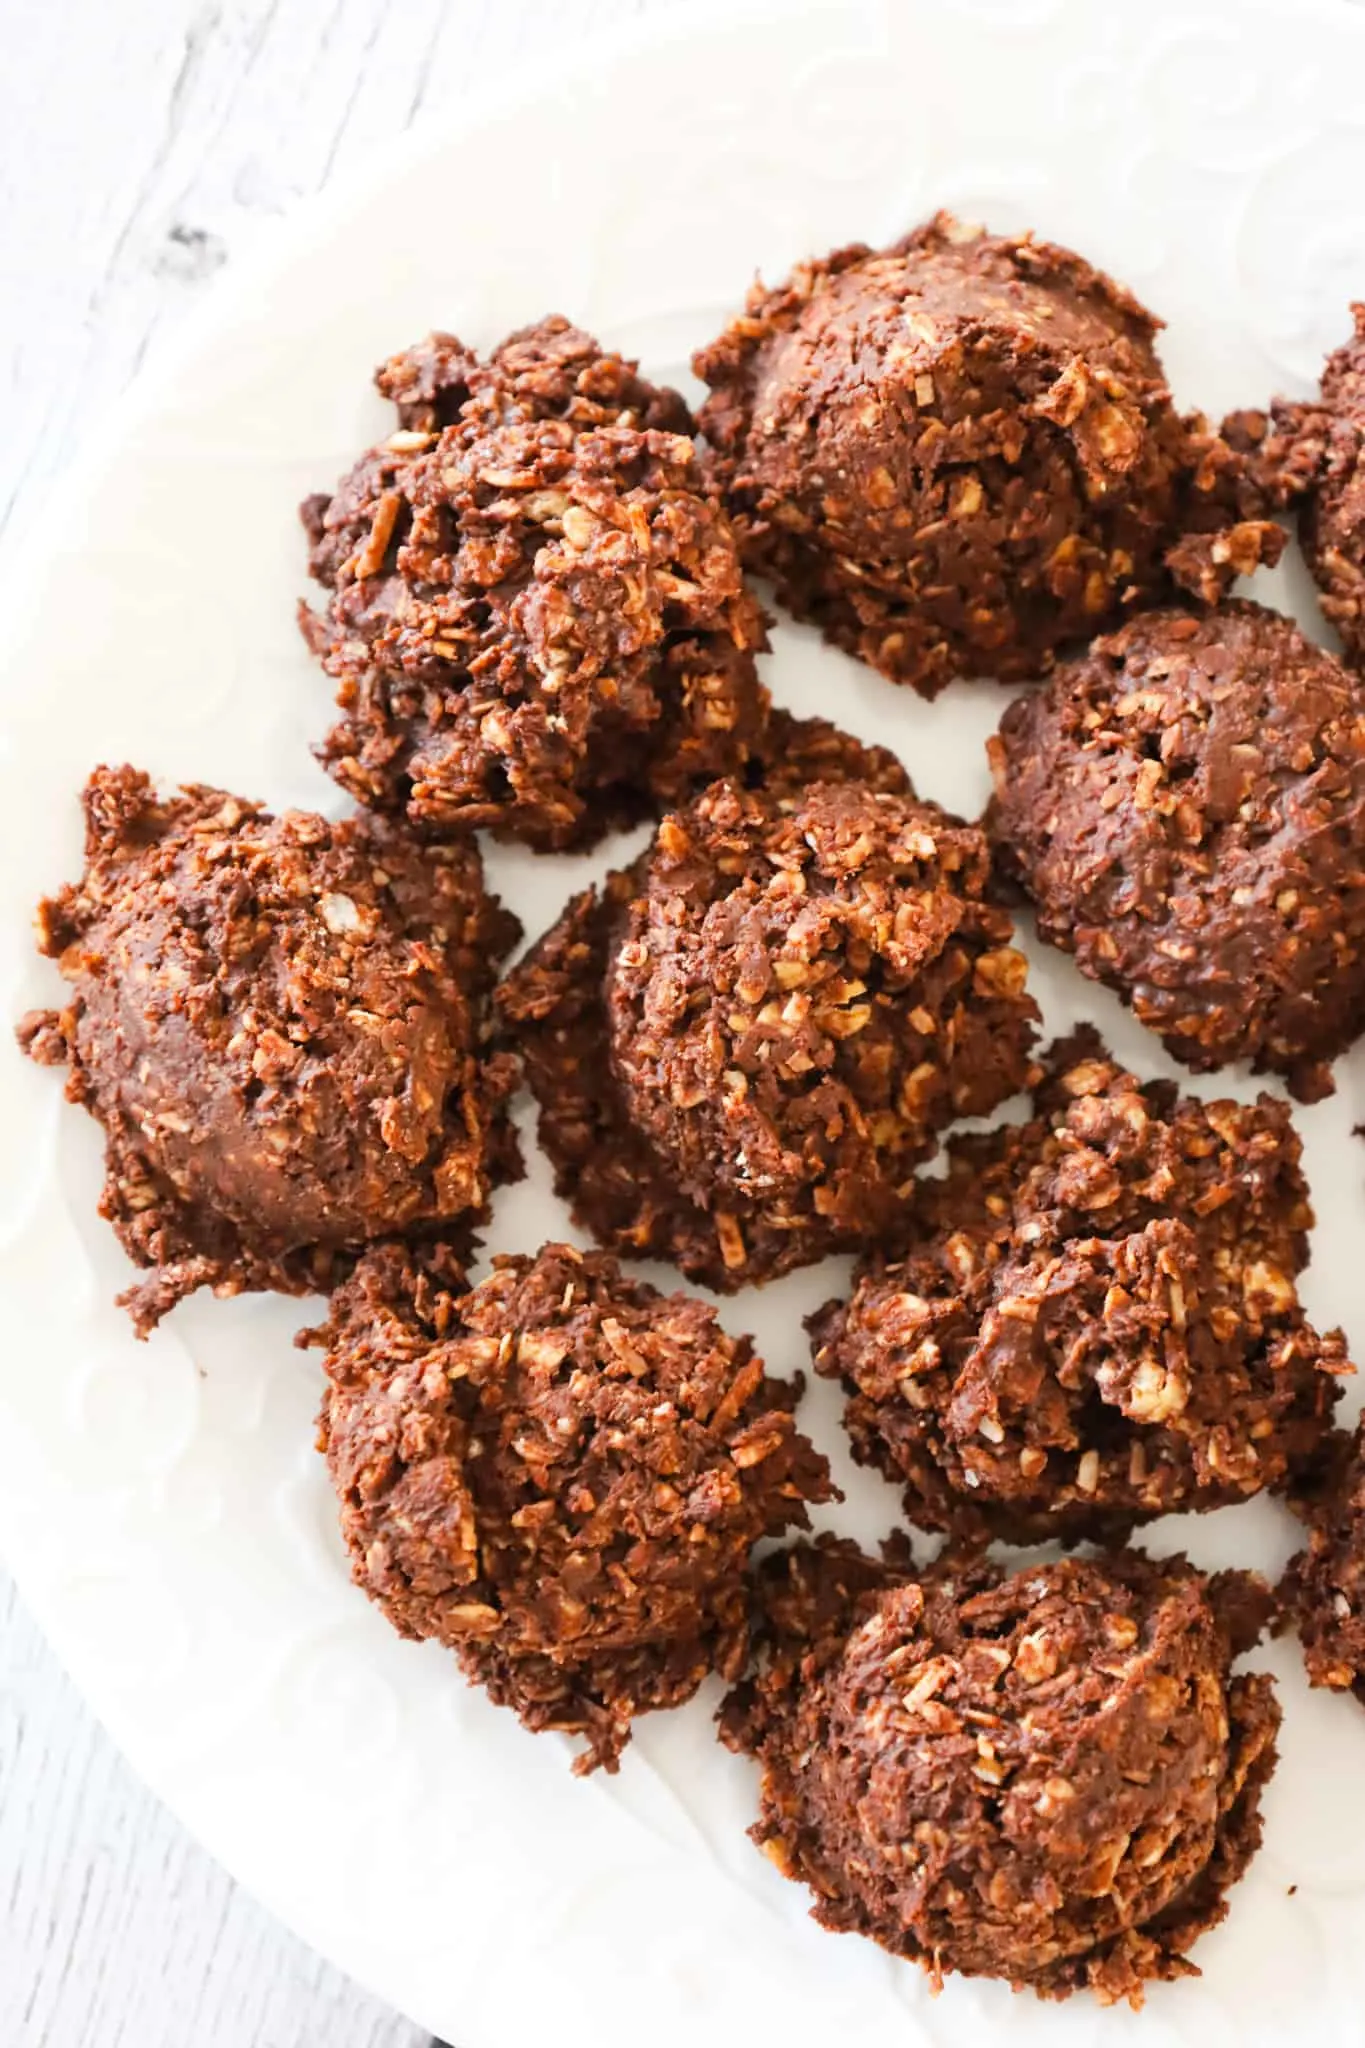 Haystack Cookies are easy no bake cookies loaded with quick oats, shredded coconut, melted chocolate and peanut butter.